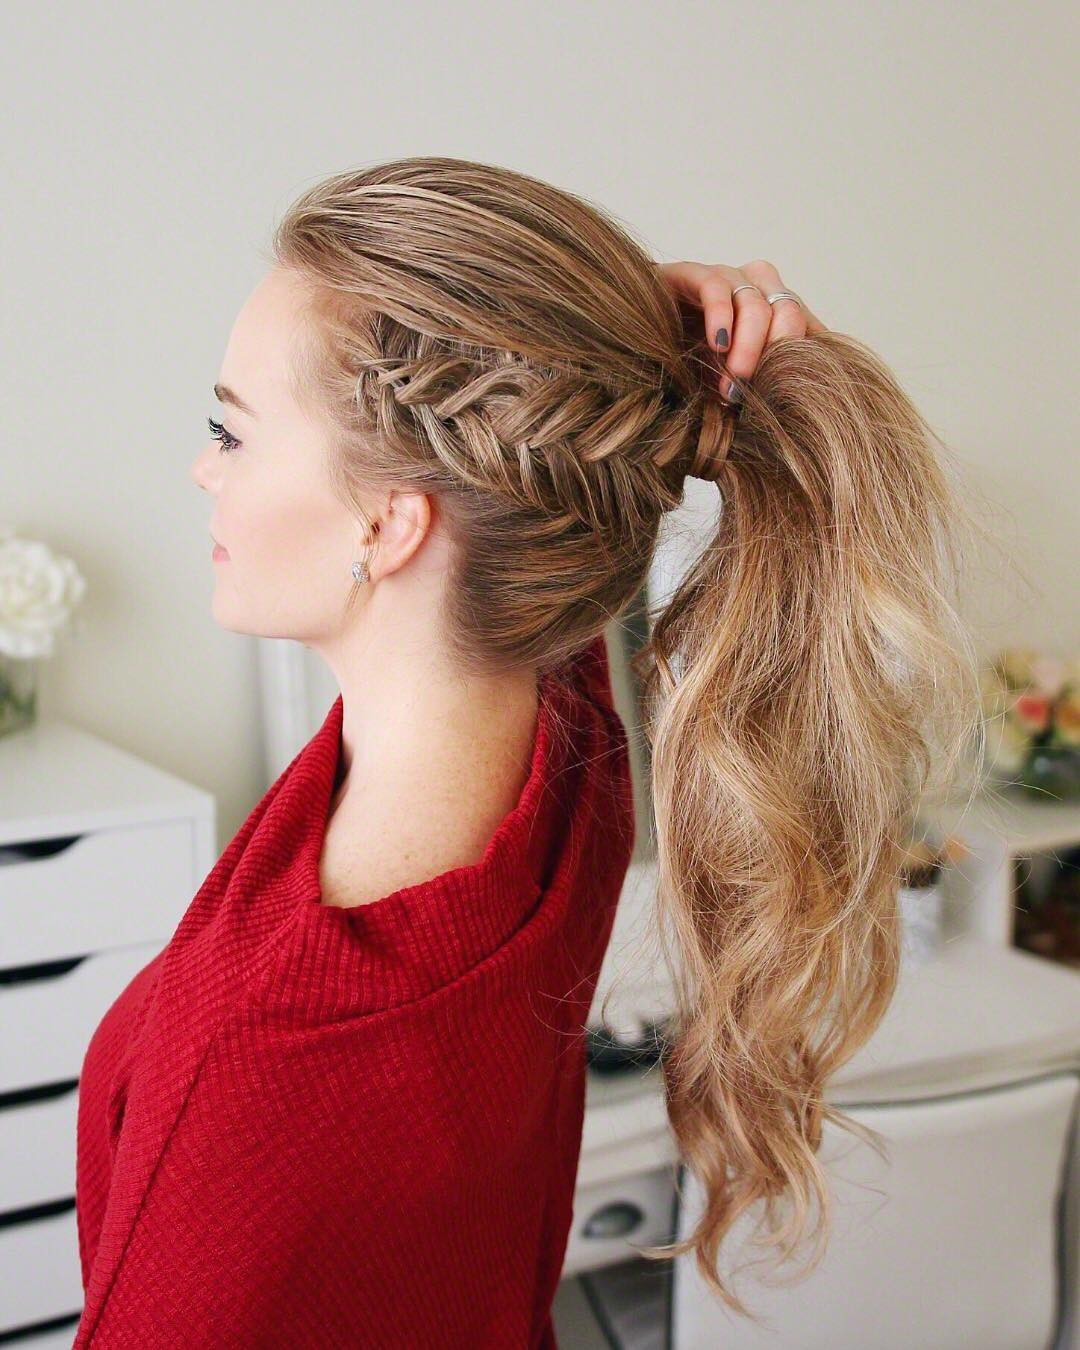 Cute Hairstyle Ideas
 10 Creative Ponytail Hairstyles for Long Hair Summer